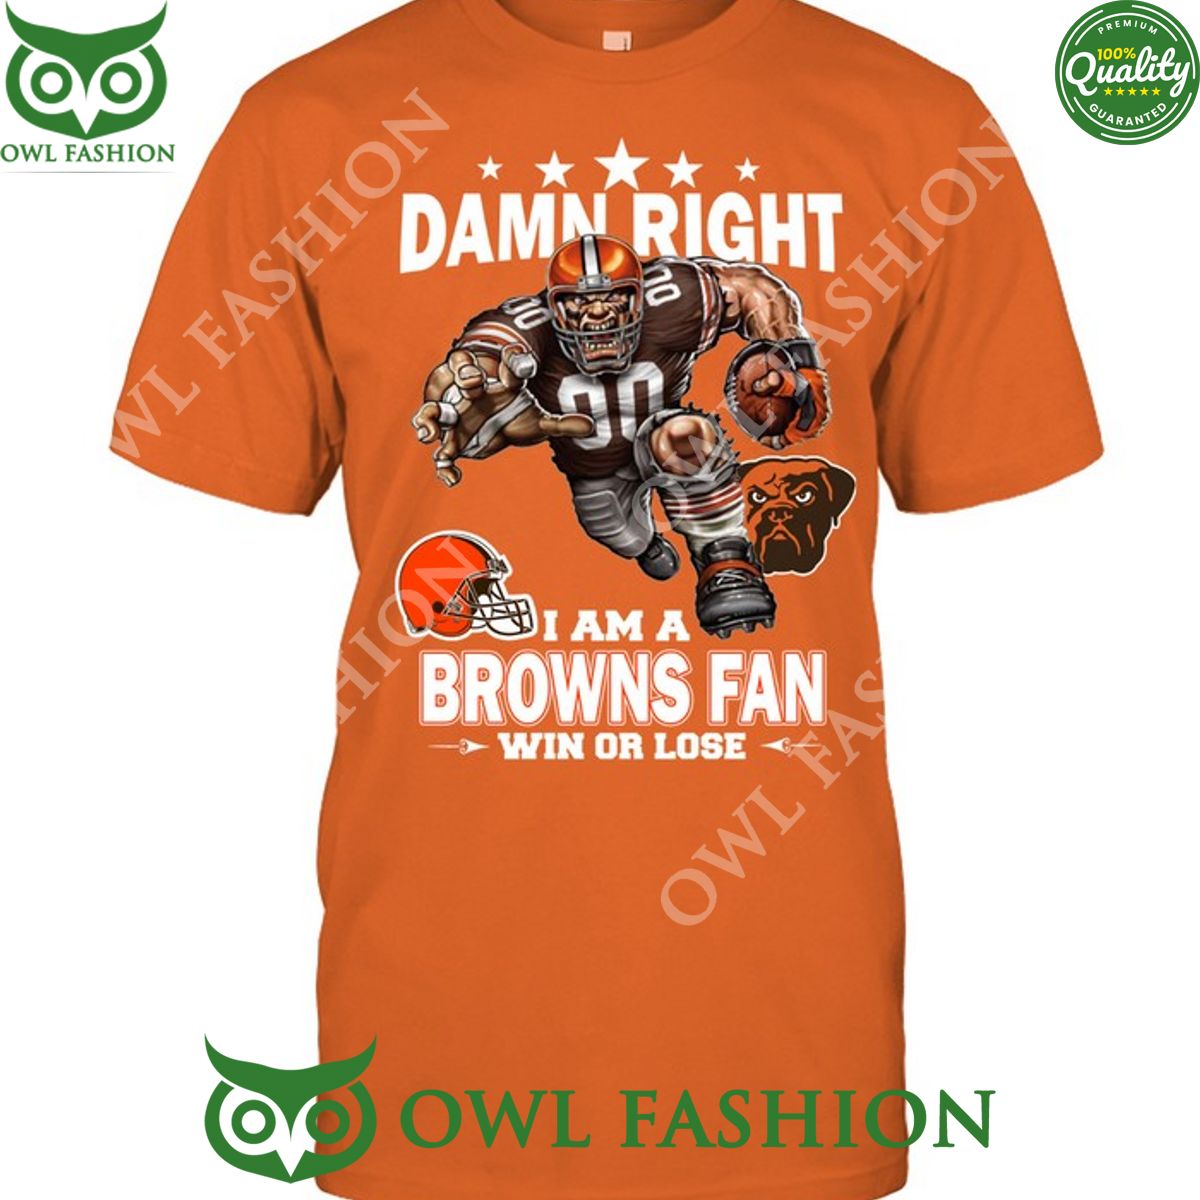 Damn Right Cleveland Browns NFL Fan Win or lose t shirt